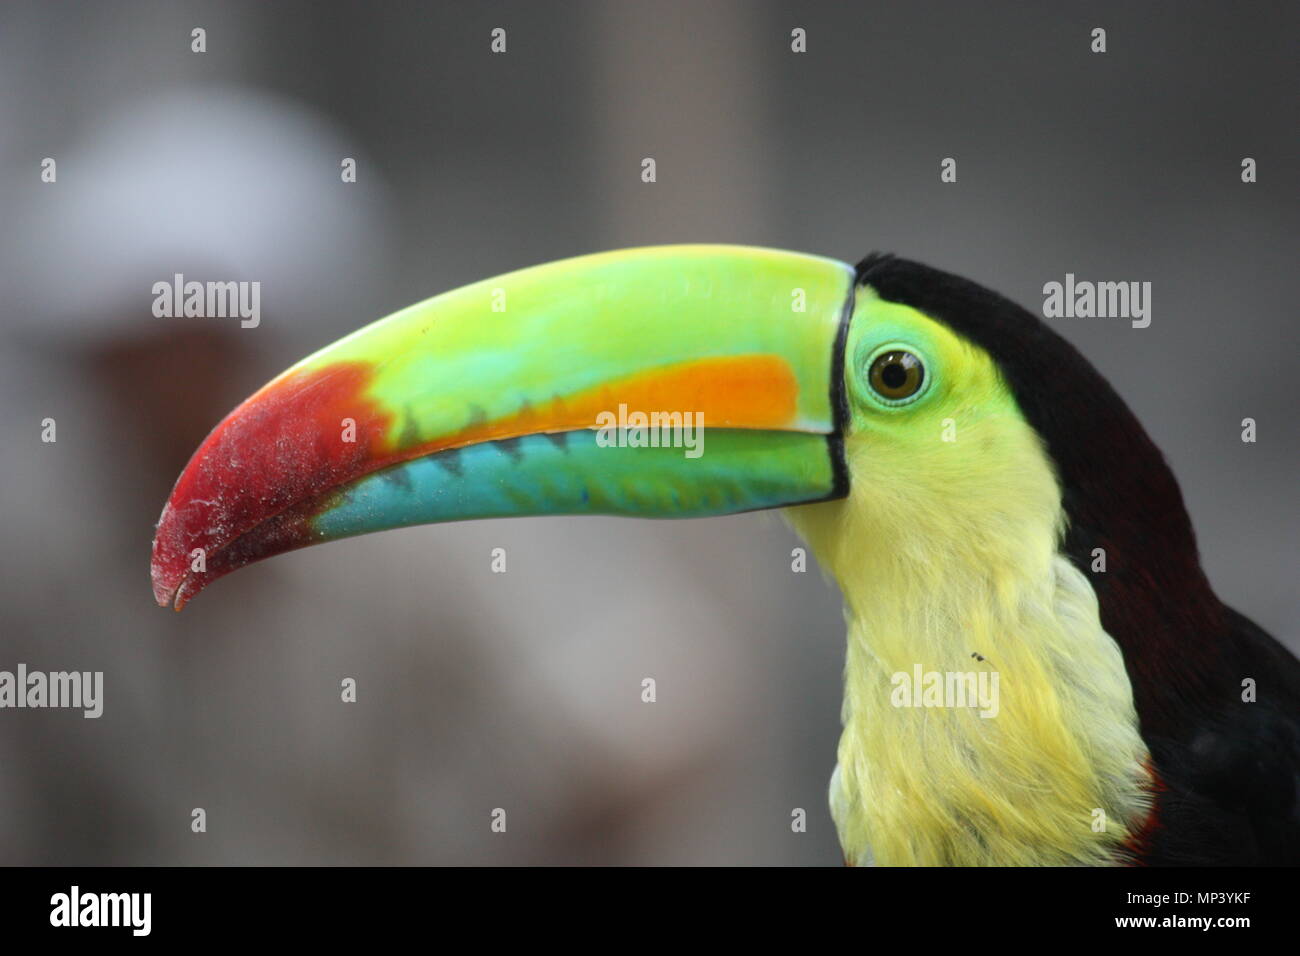 Closeup of colorful beak and head of a Toucan from Costa Rica Stock Photo